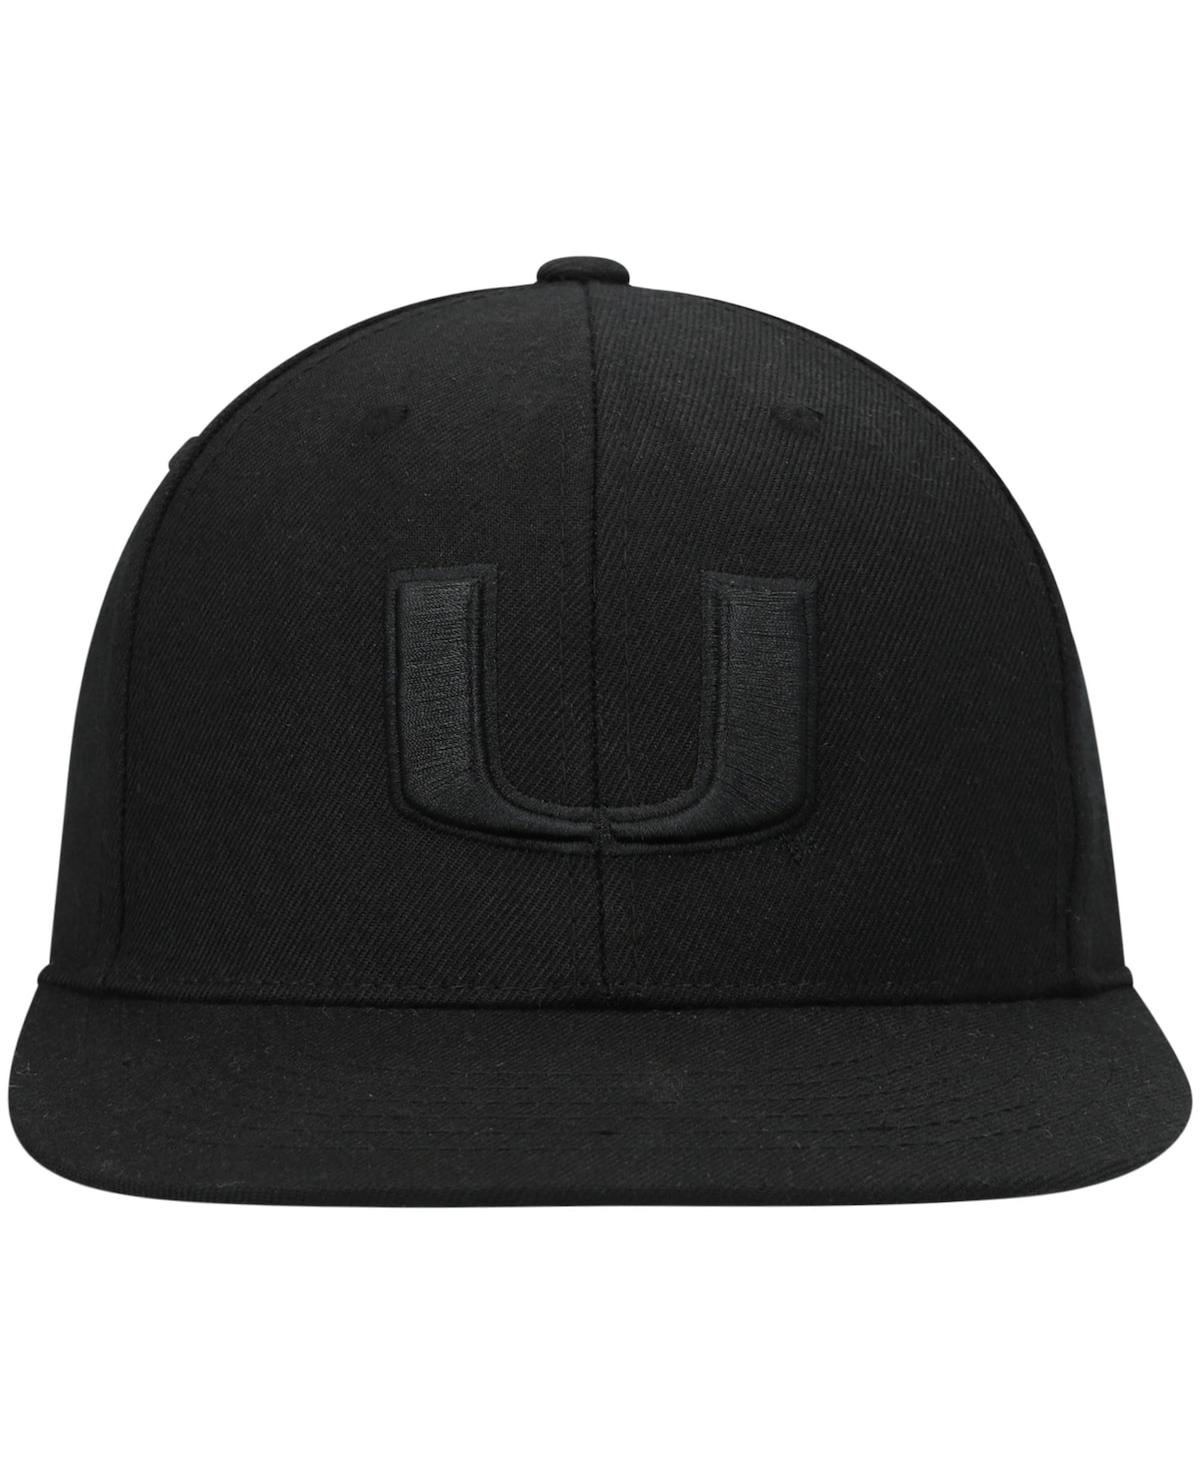 Shop Top Of The World Men's  Miami Hurricanes Black On Black Fitted Hat